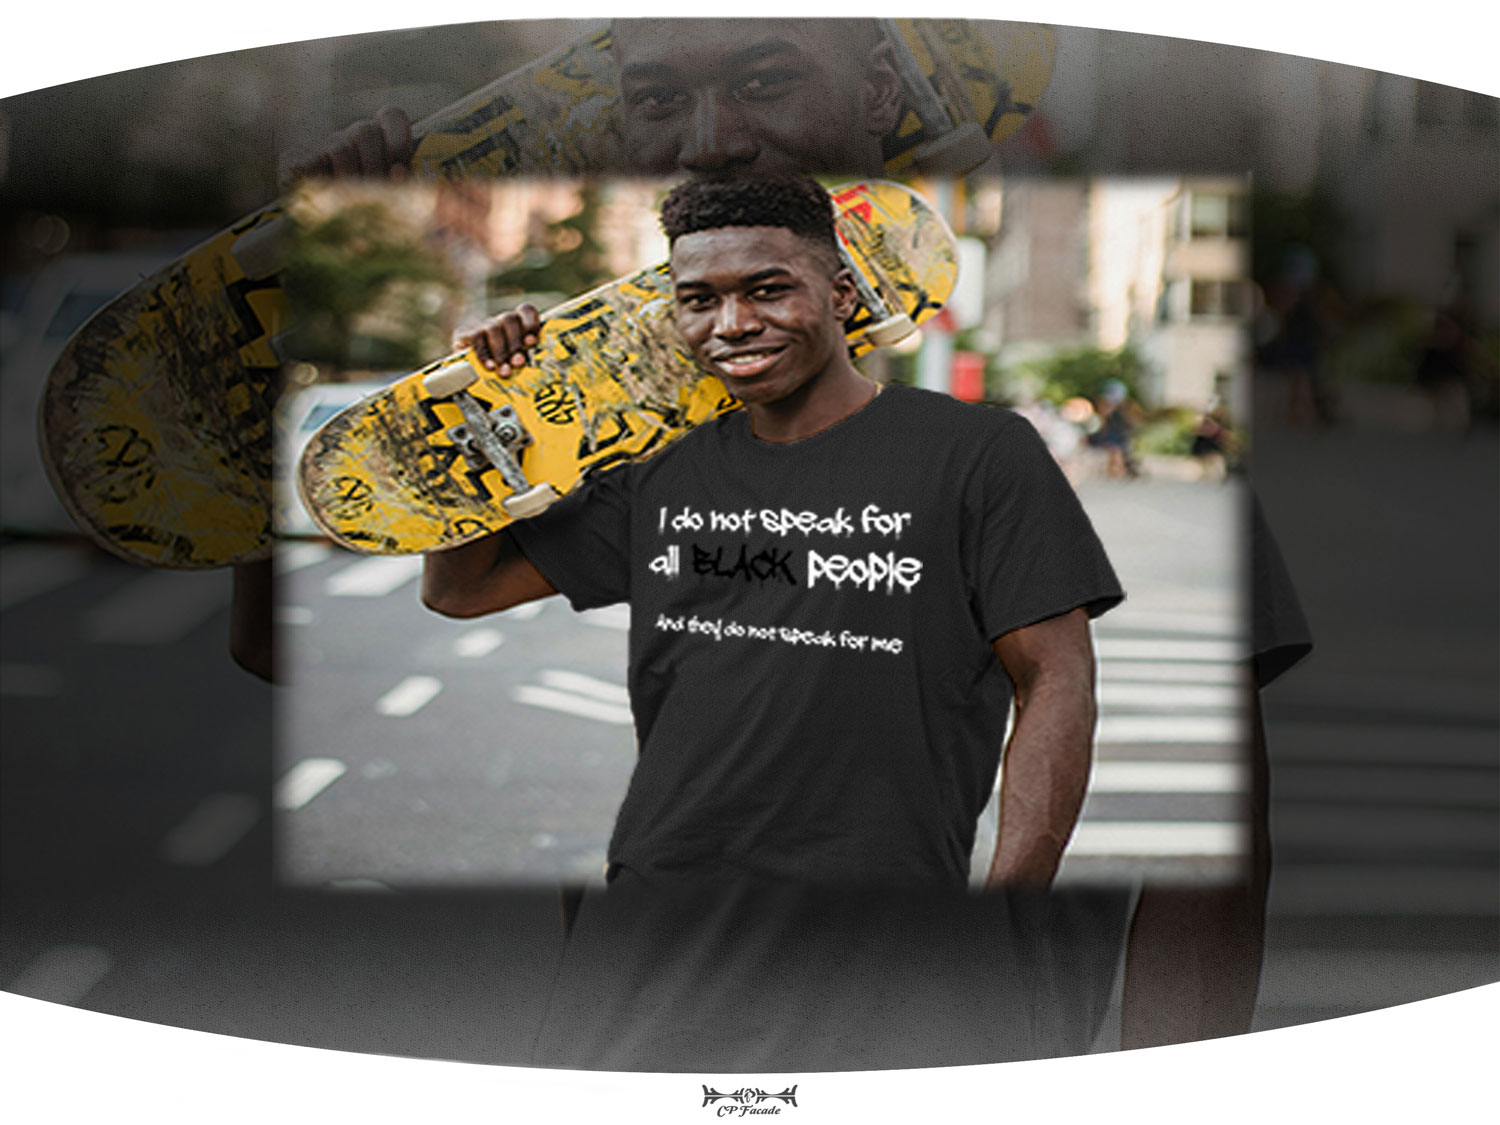 Black man holding yellow skate board wearing dark grey t-shirt with the phrase I do not speak for all black people on the front of it